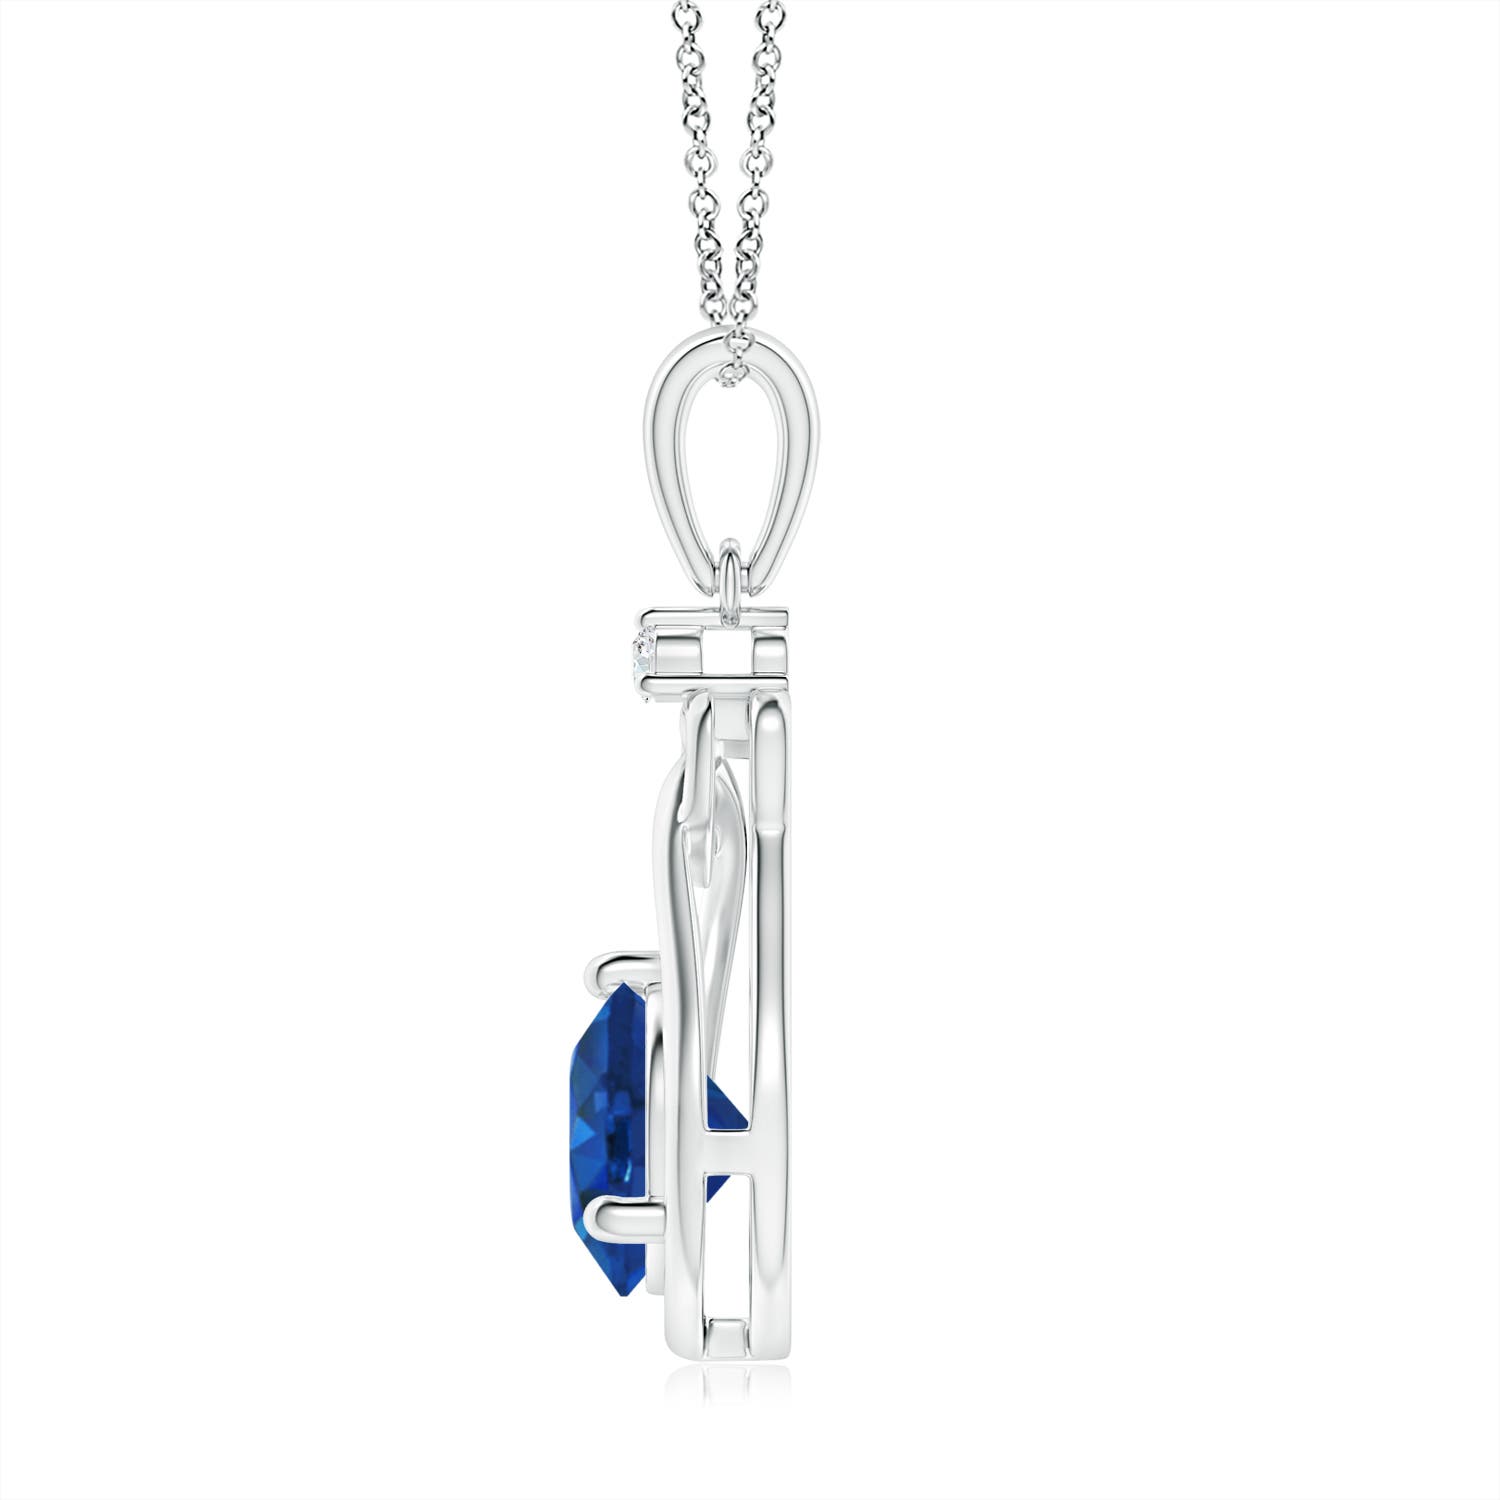 AAA - Blue Sapphire / 1.62 CT / 14 KT White Gold